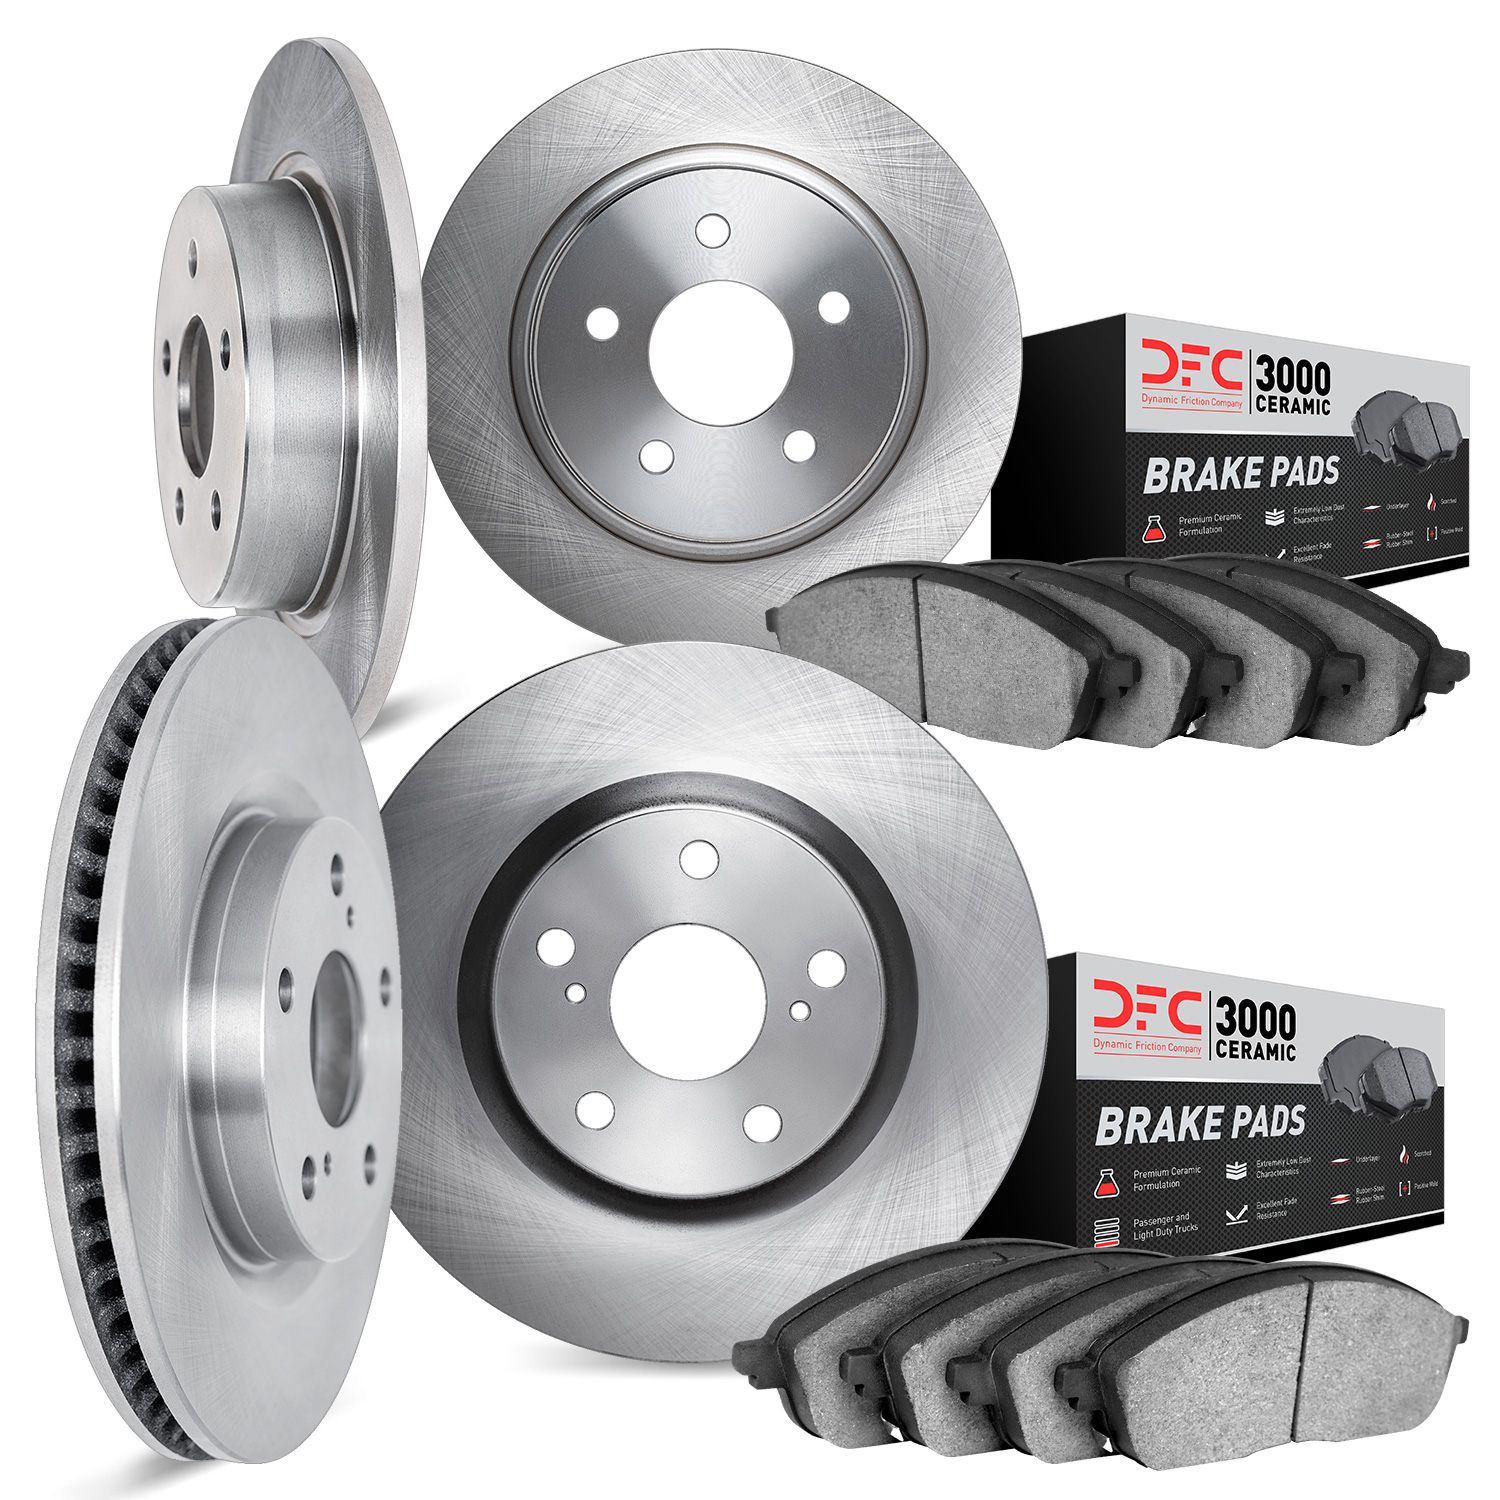 6304-74030 Brake Rotors with 3000-Series Ceramic Brake Pads Kit, 2001-2003 Audi/Volkswagen, Position: Front and Rear